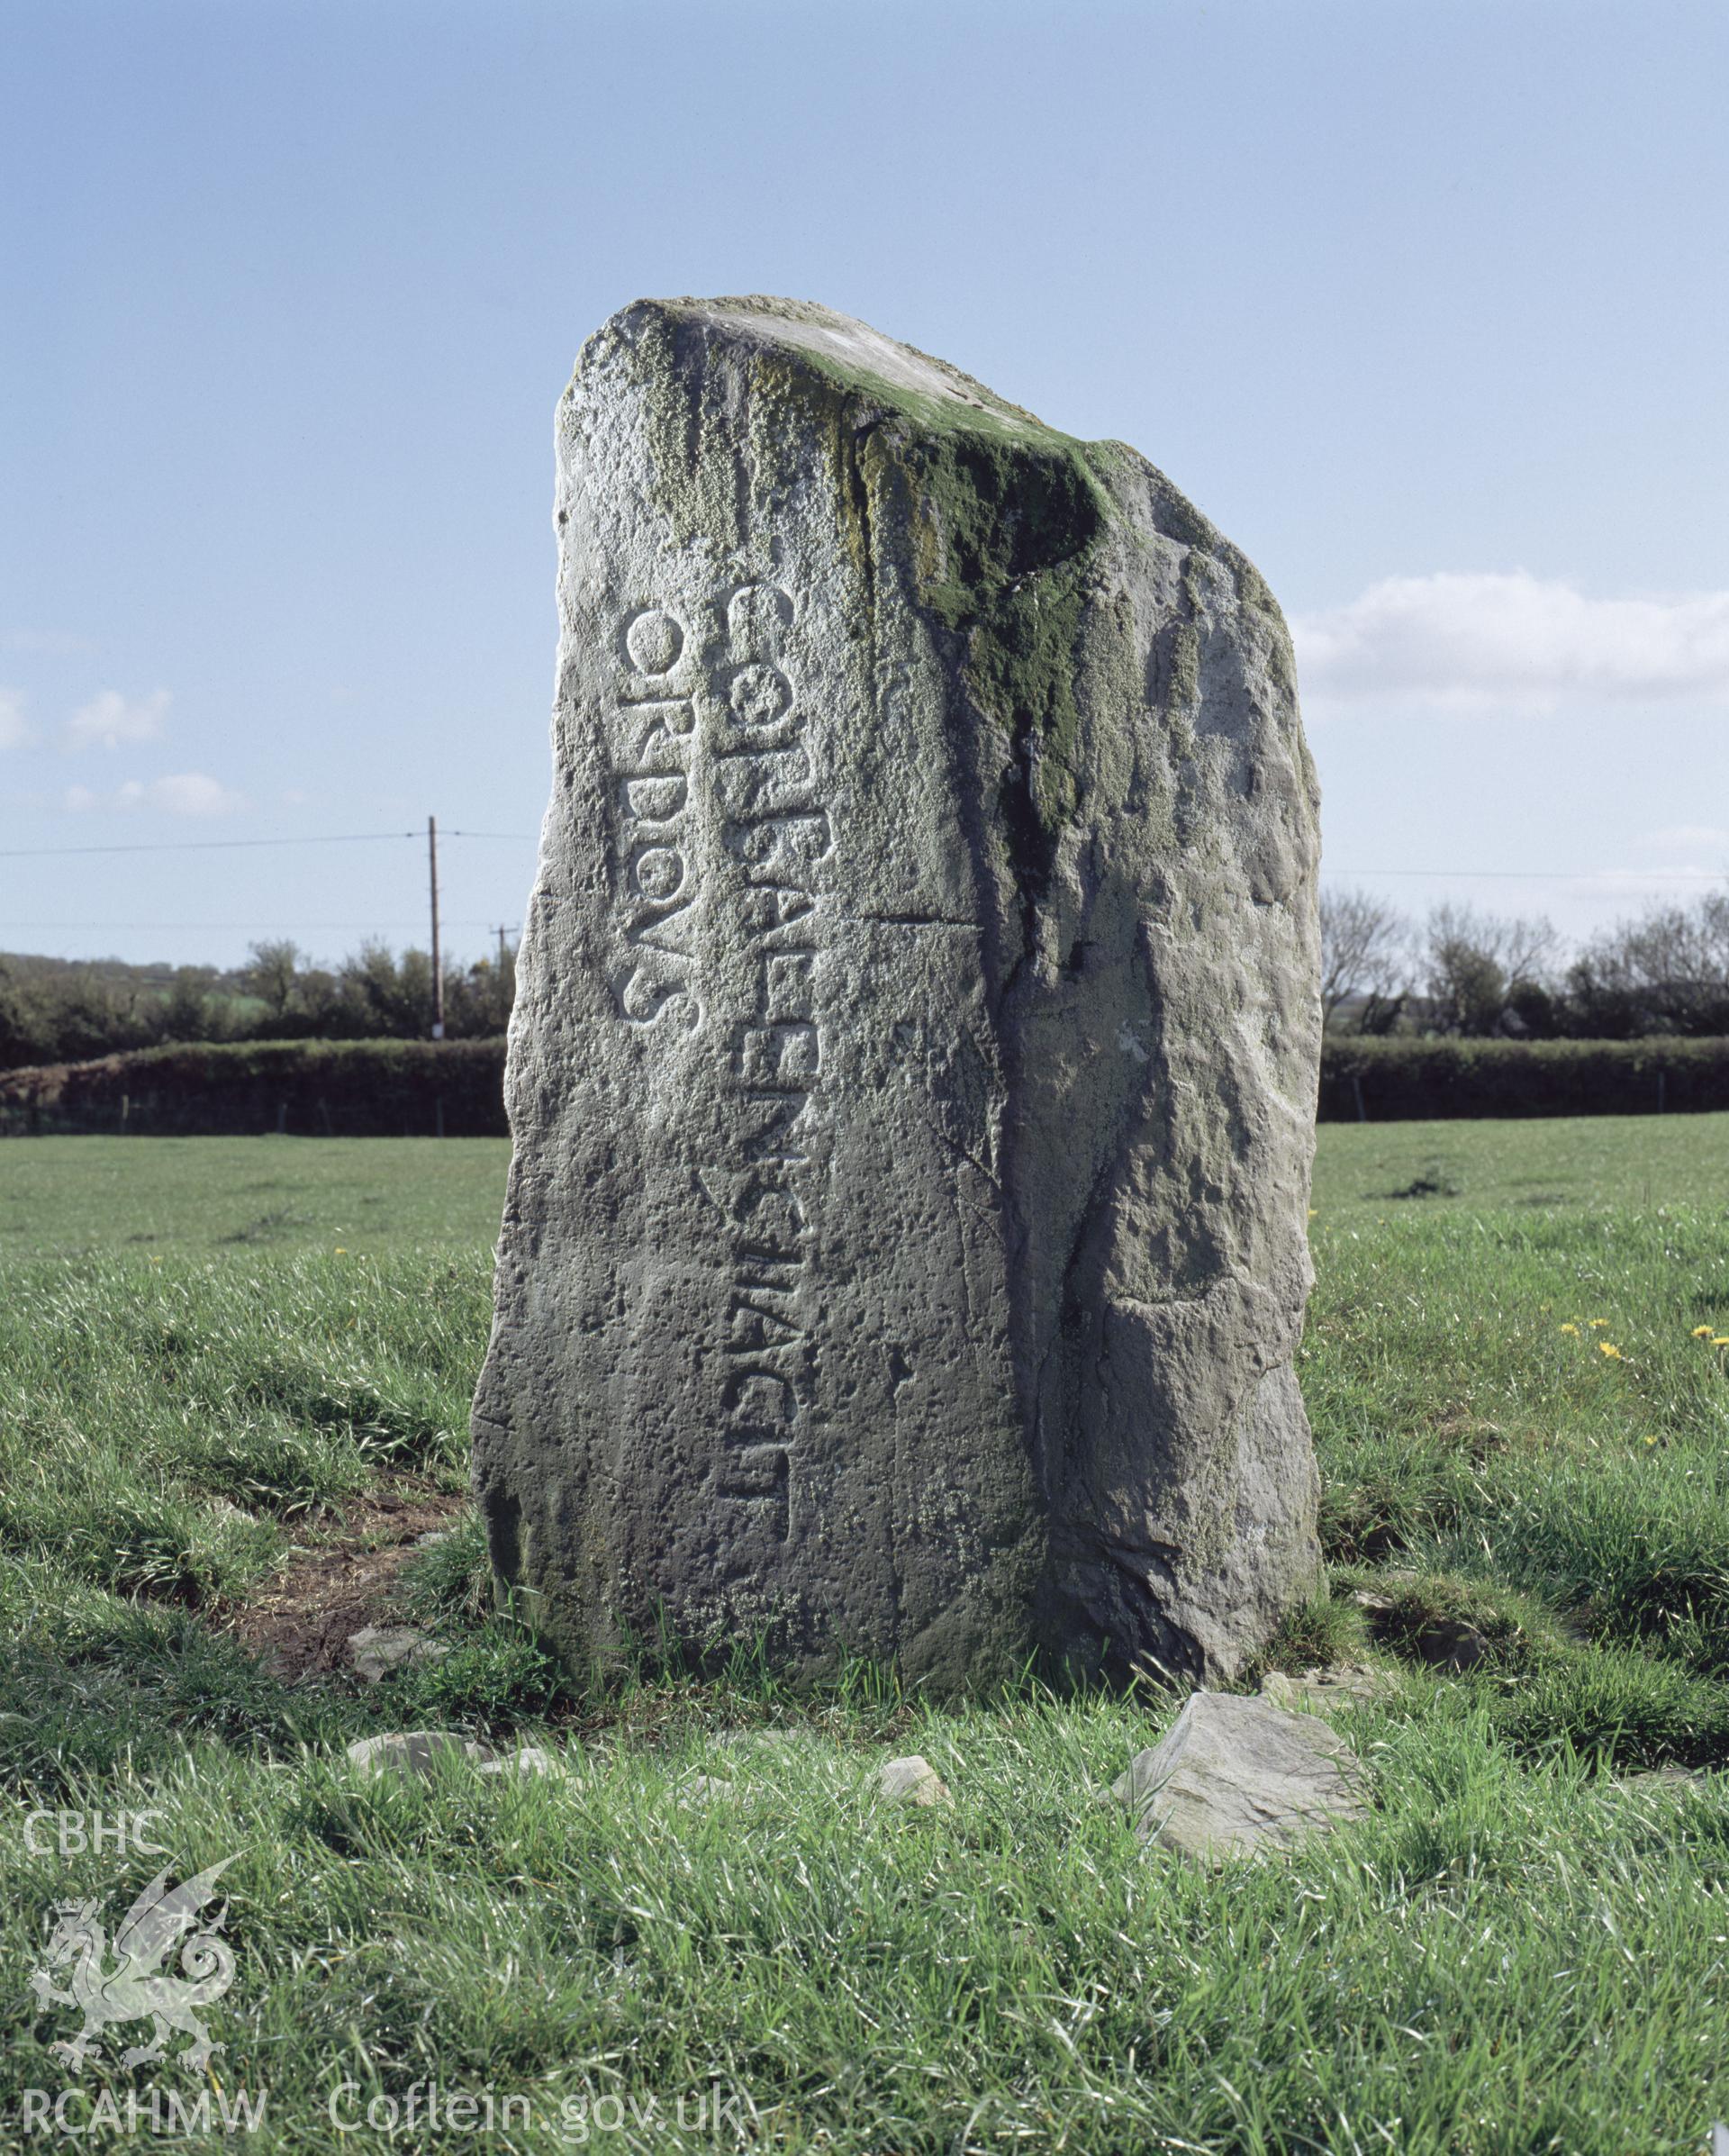 RCAHMW colour transparency showing inscribed stone at Penbryn.